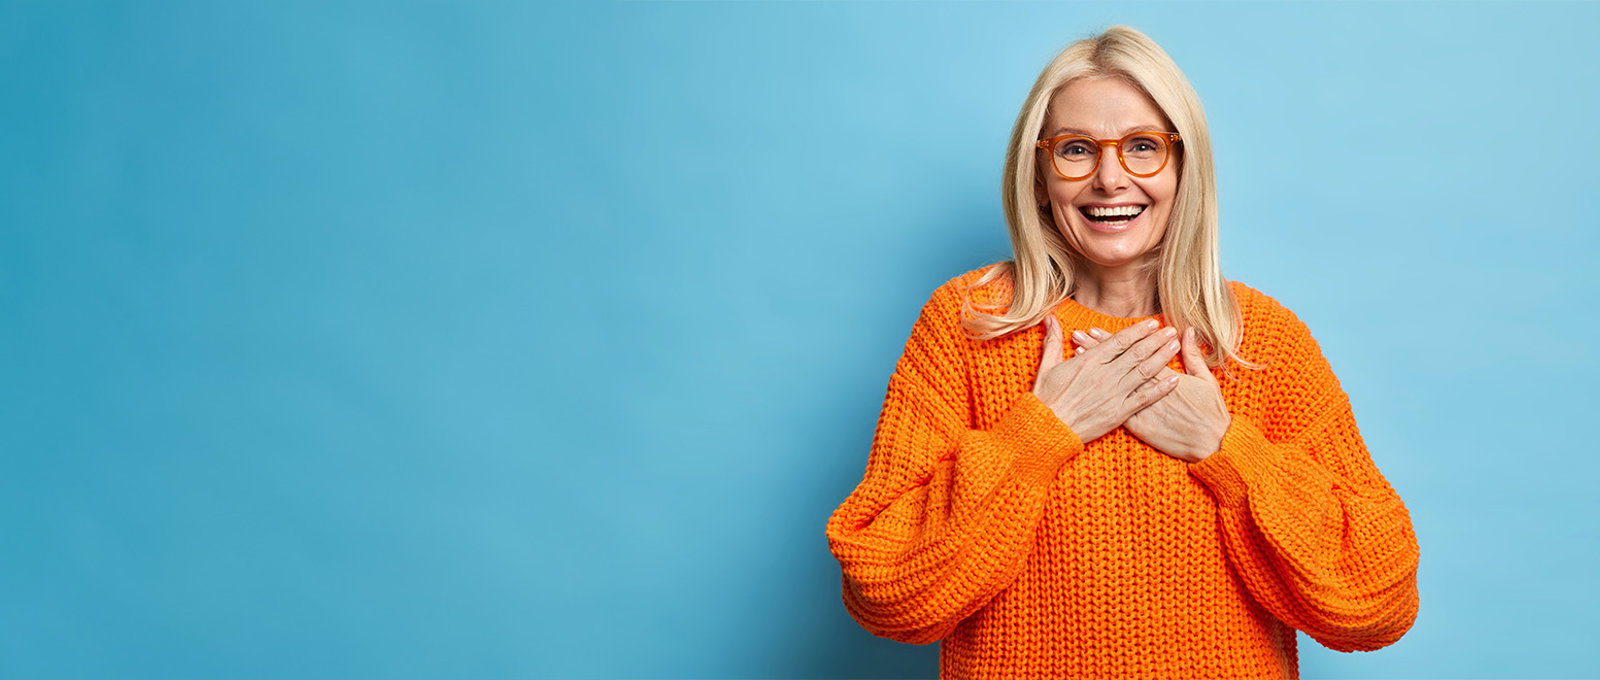 Smiling Woman With Glasses In Orange Jumper, Blue Background